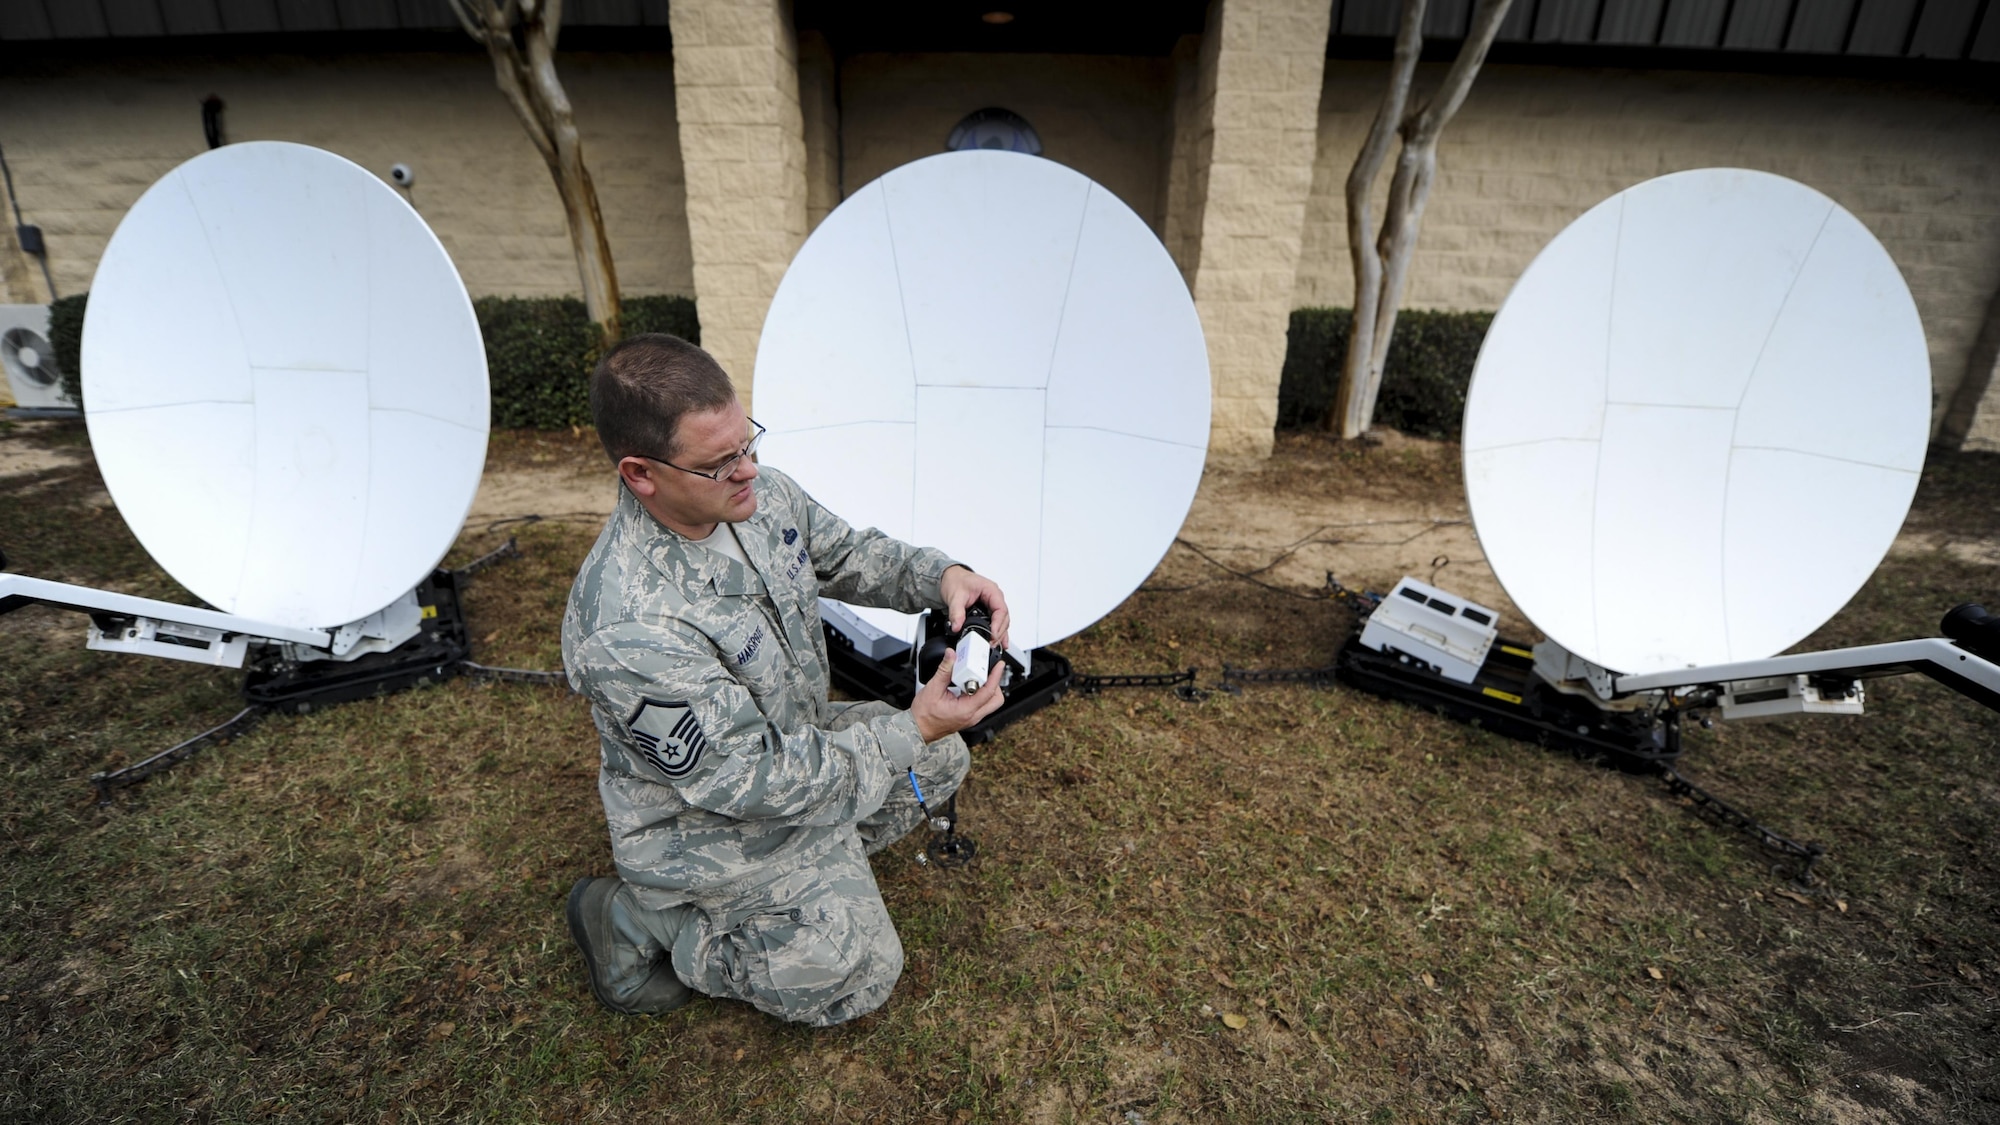 Master Sgt. Lucas Hansrote, chief of communications support with the 25th Intelligence Squadron, installs a soft deployable node terminal Hawkeye satellite dish at Hurlburt Field, Fla., Jan. 11, 2017. These dishes are used to provide secured internet access in deployed locations to continue special operations missions. Anytime, anyplace. (U.S. Air Force photo by Airman Dennis Spain)